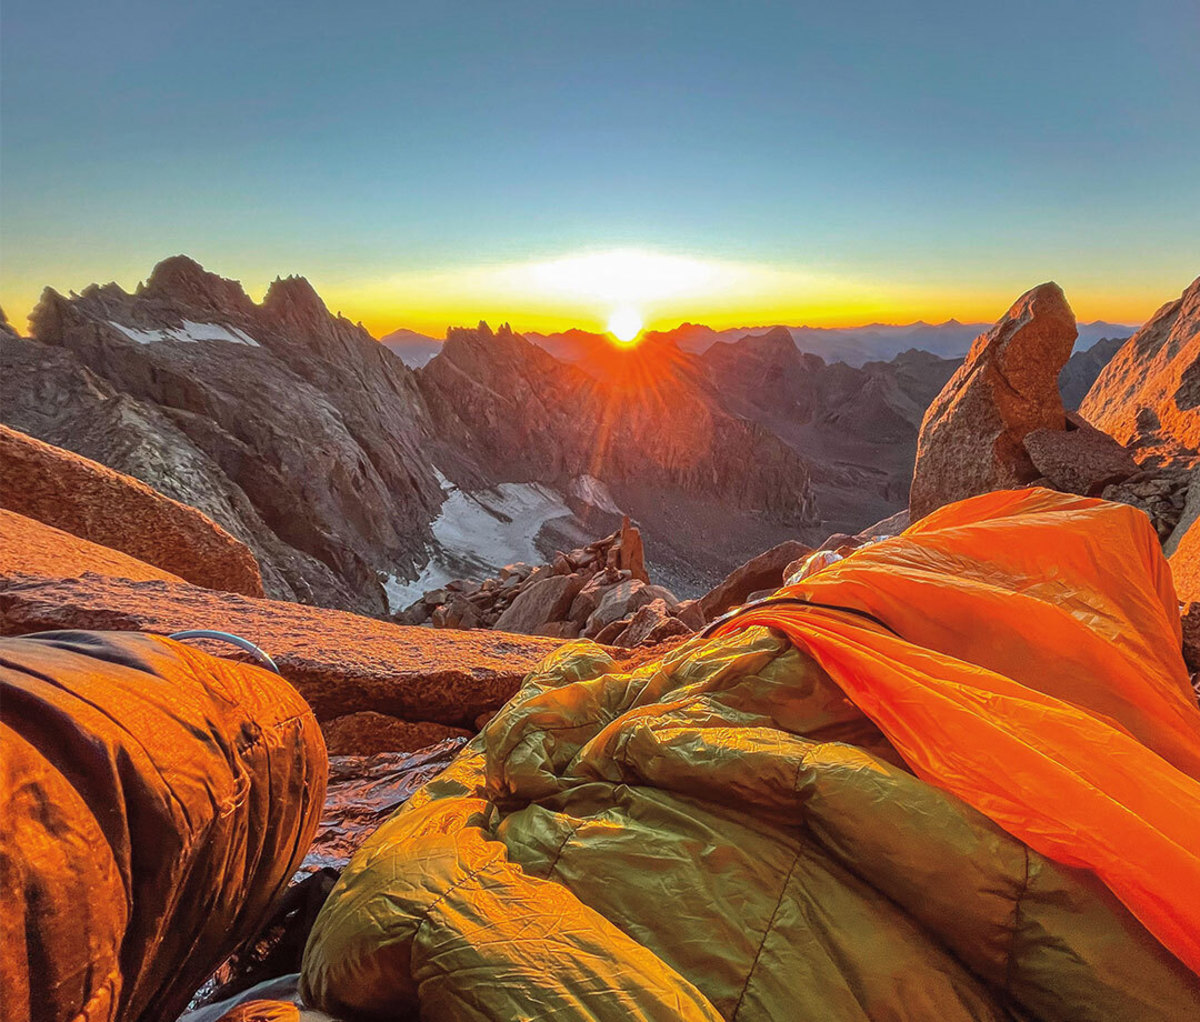 Mountain peaks at sunrise from vantage point of alpinist in sleeping bag